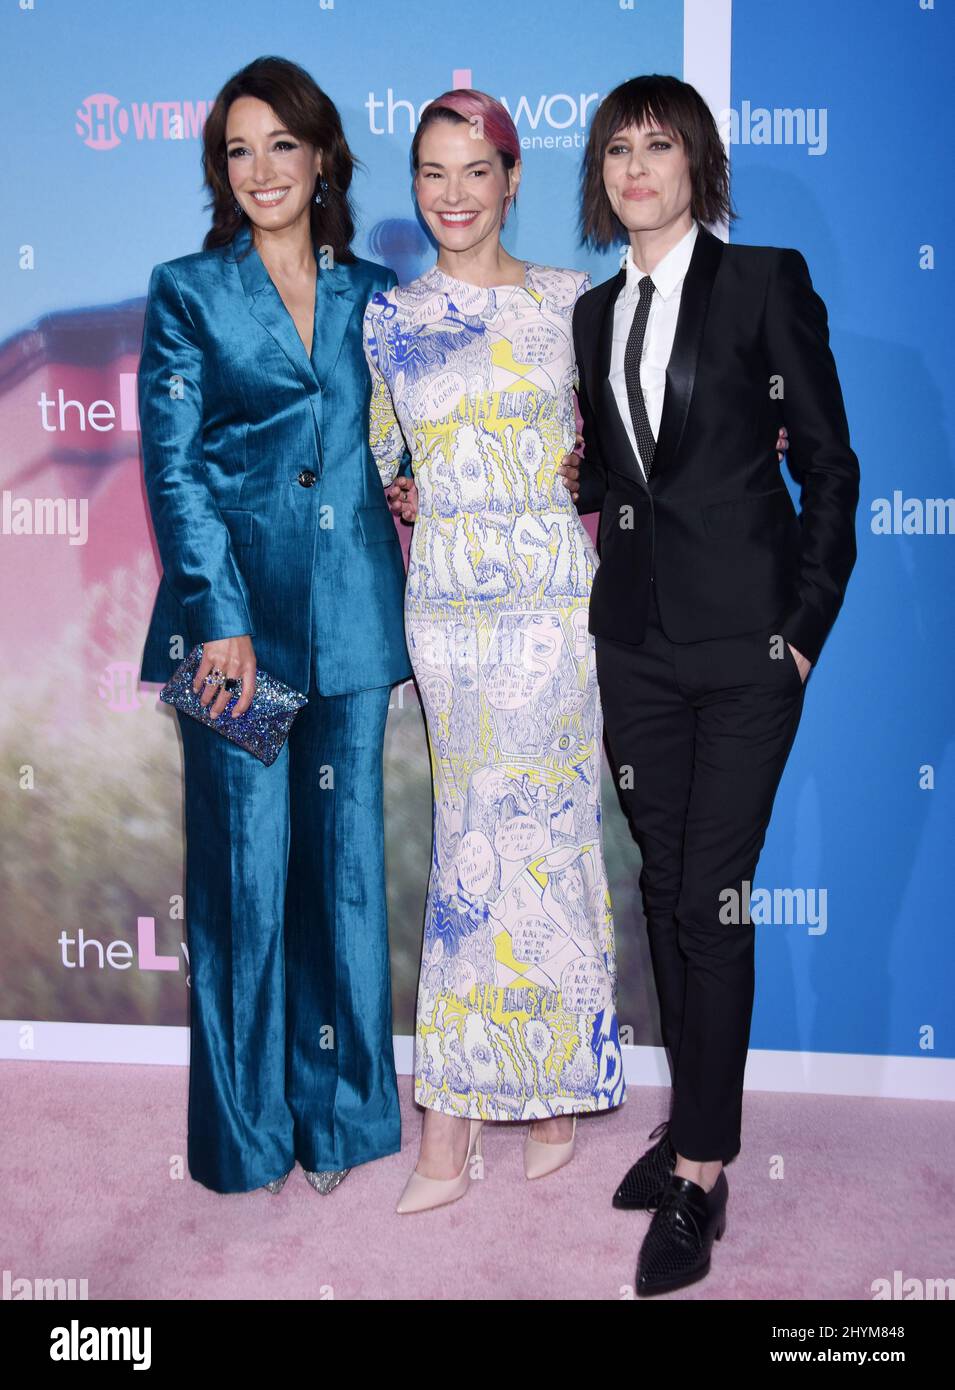 Jennifer Beals, Leisha Hailey and Katherine Moennig at Showtime's 'The L Word: Generation Q' Premiere held at the Regal Cinemas L.A. LIVE on December 2, 2019 in Los Angeles, CA. Stock Photo